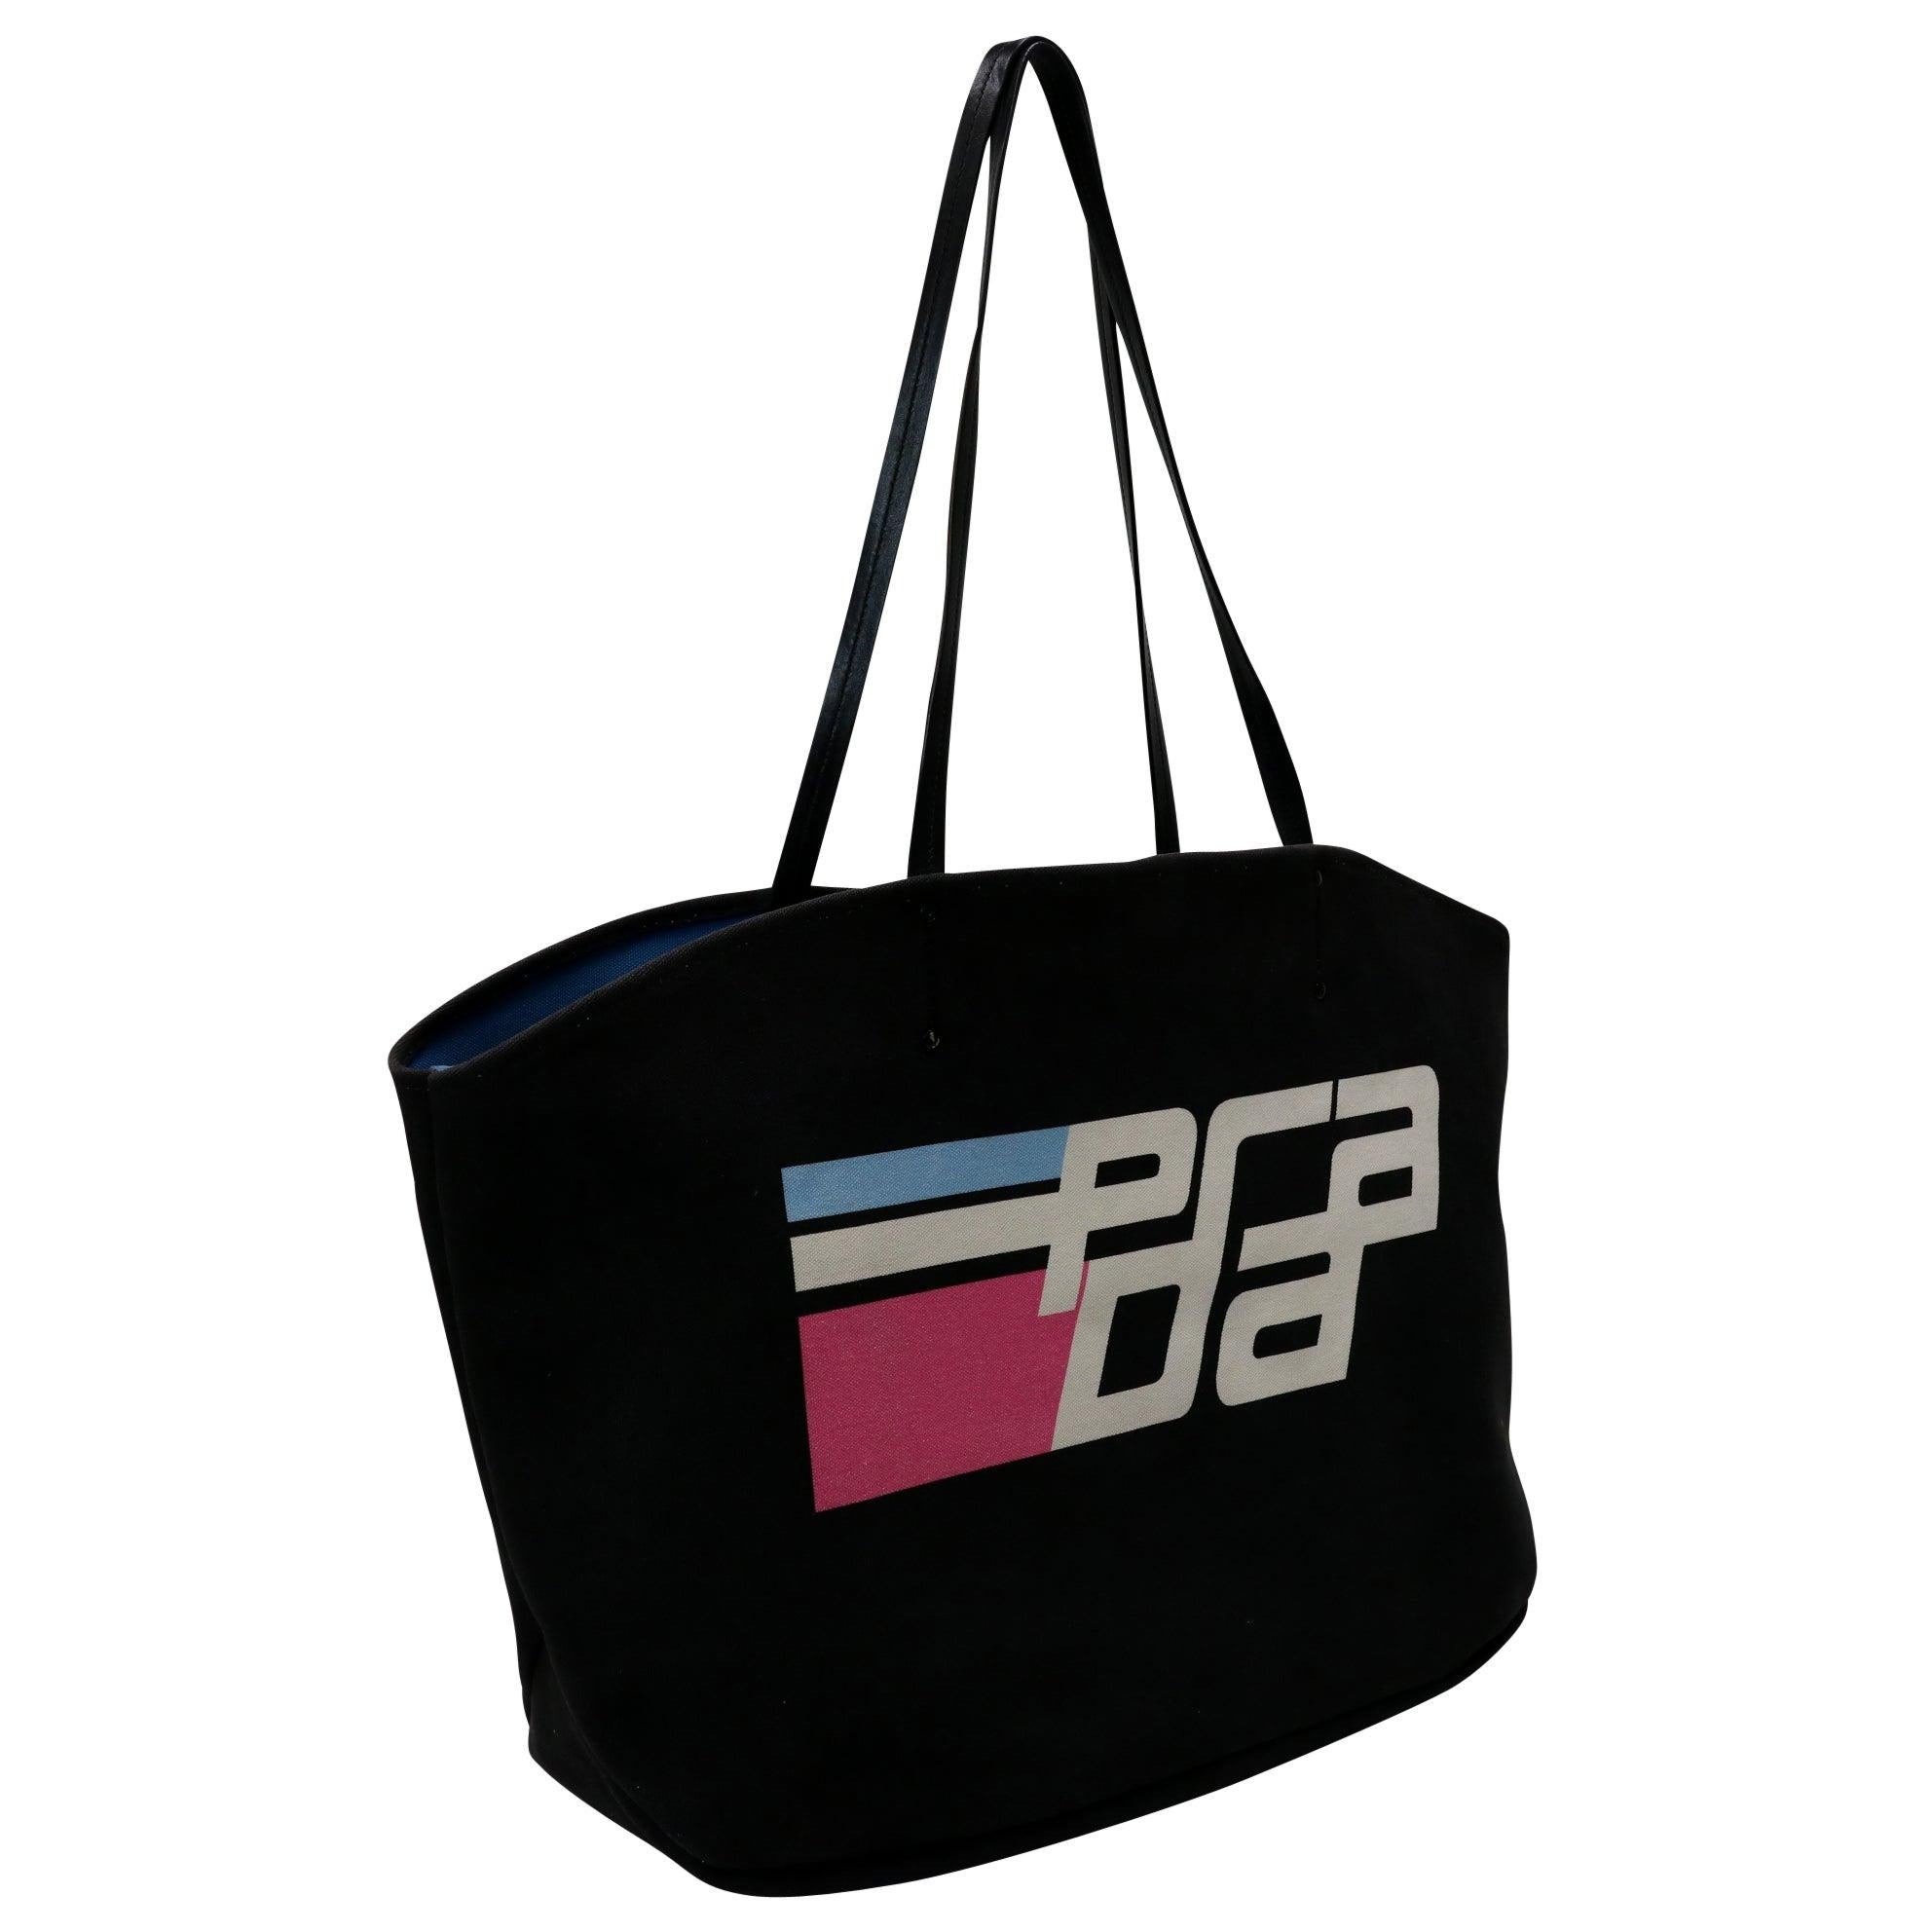 Here is a beautiful Prada large tote bag with racing stripes and a huge PRADA print on the front. This is the perfect handbag for a stylish woman who likes to be noticed. You'll look great and feel great with this Prada bag in your hand includes